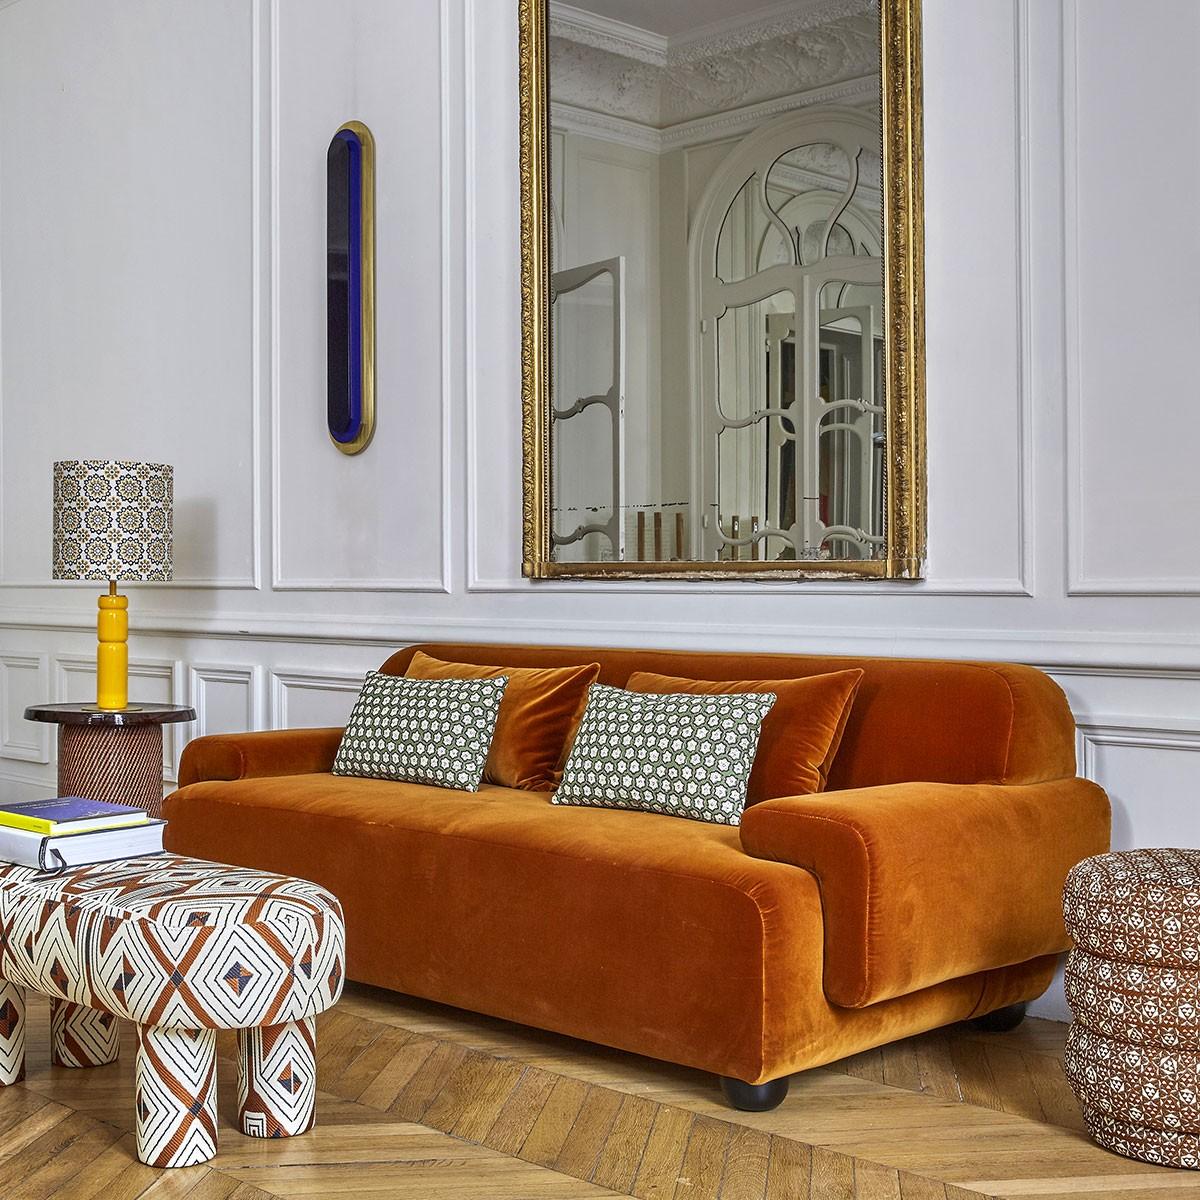 Popus editions lena 3 seater sofa in corn megeve fabric with a knit effect.

It looks like it's straight out of a movie, with its generous curves and wide armrests. It is a real invitation to spend long Sundays with the family, comfortably seated